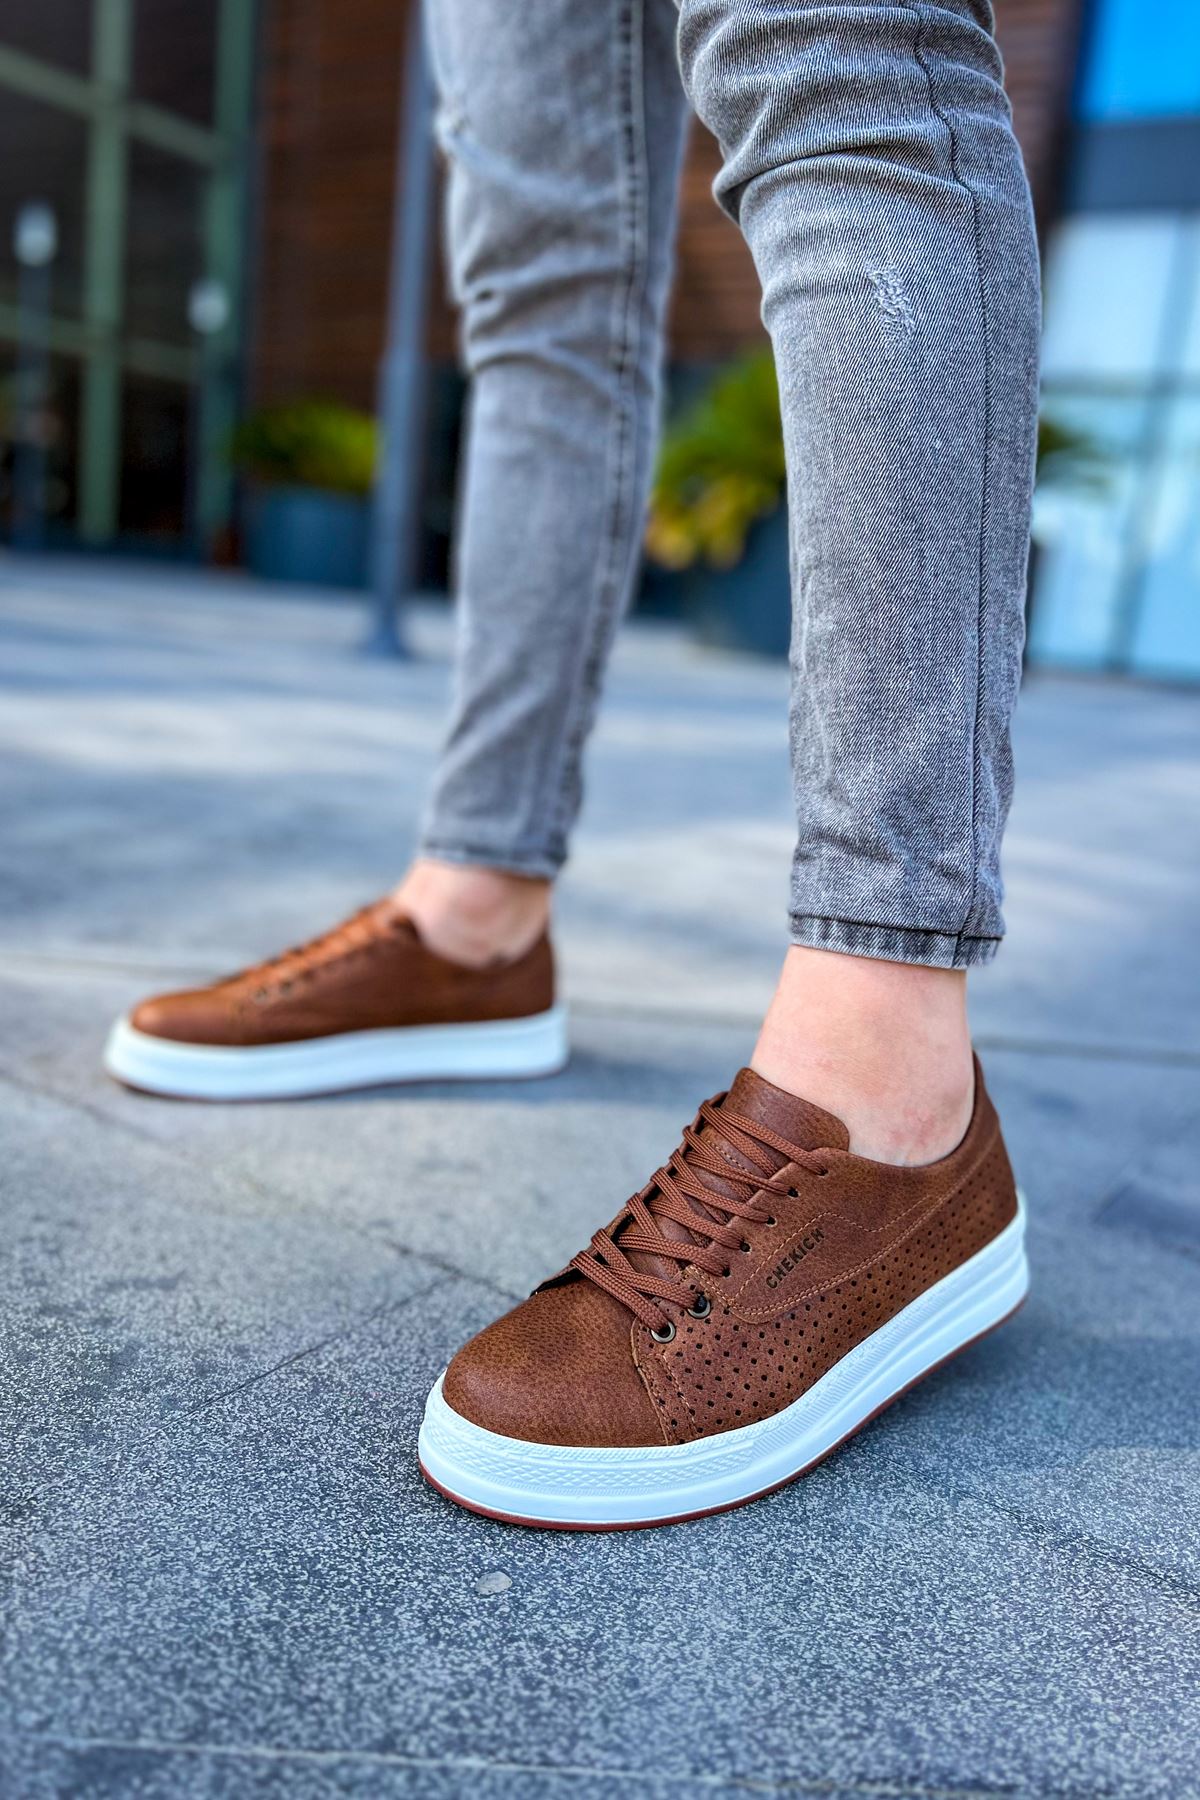 CH043 Men's Unisex Brown-White Sole Casual Shoes - STREETMODE ™